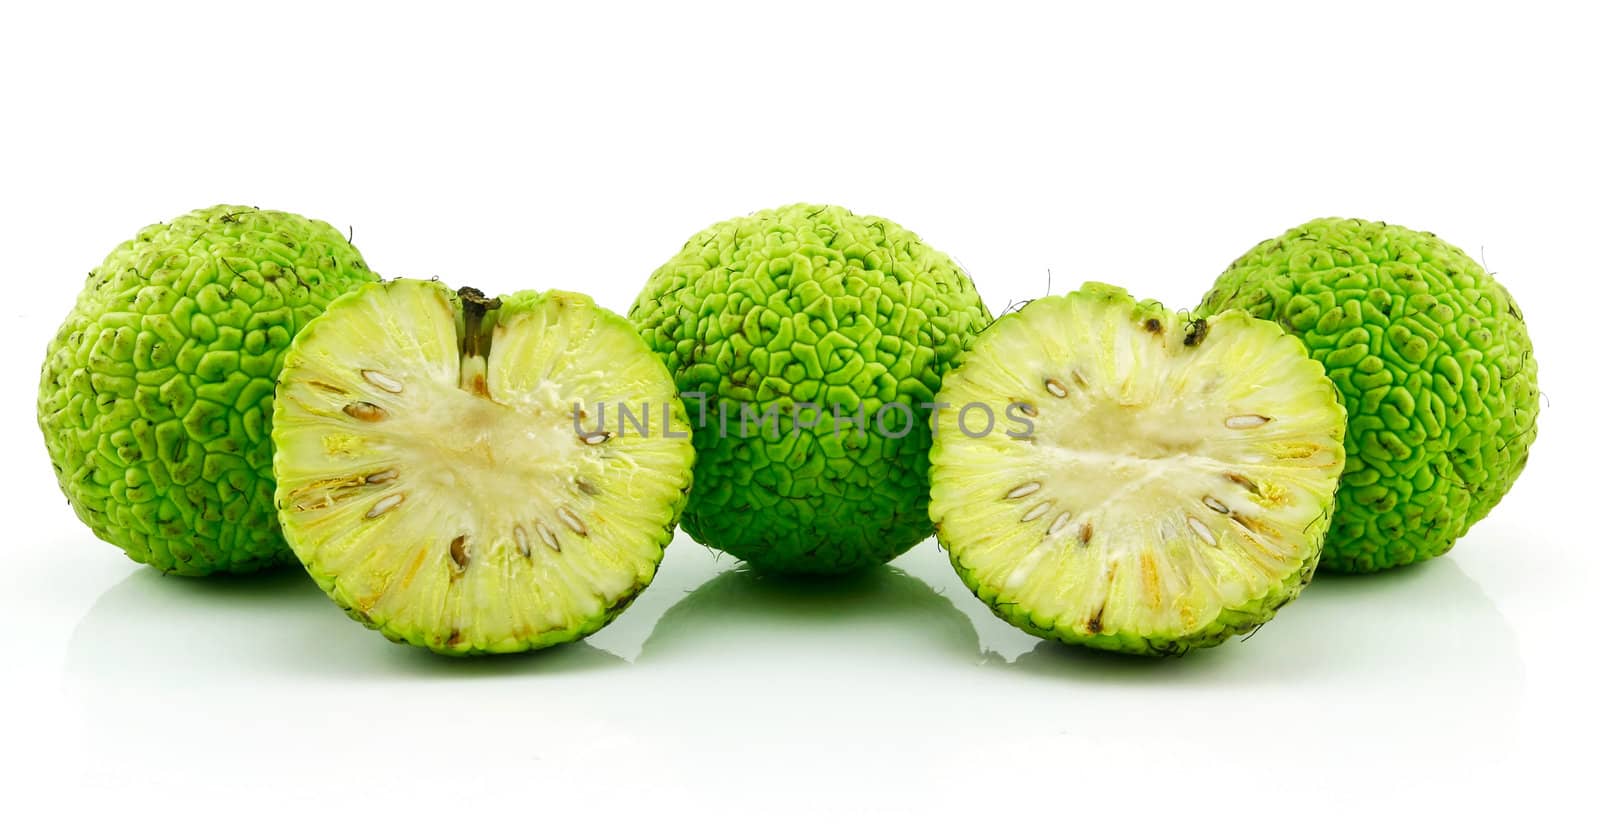 Sliced Osage Oranges (Maclura) Isolated on White by alphacell